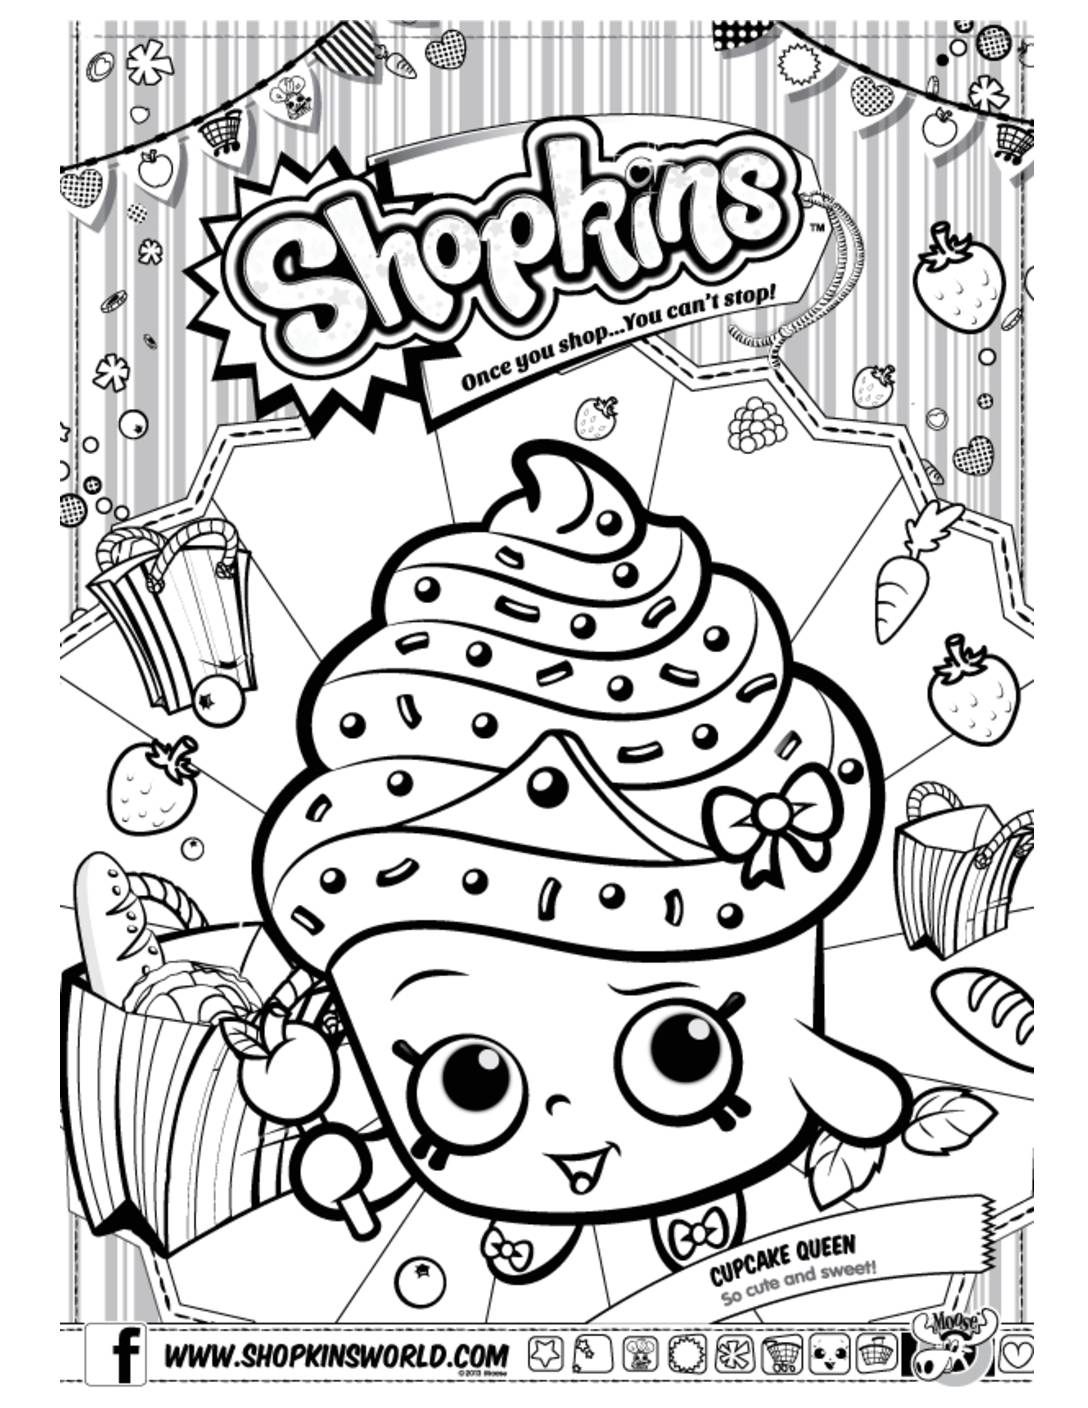 Shopkins Coloring Page 7